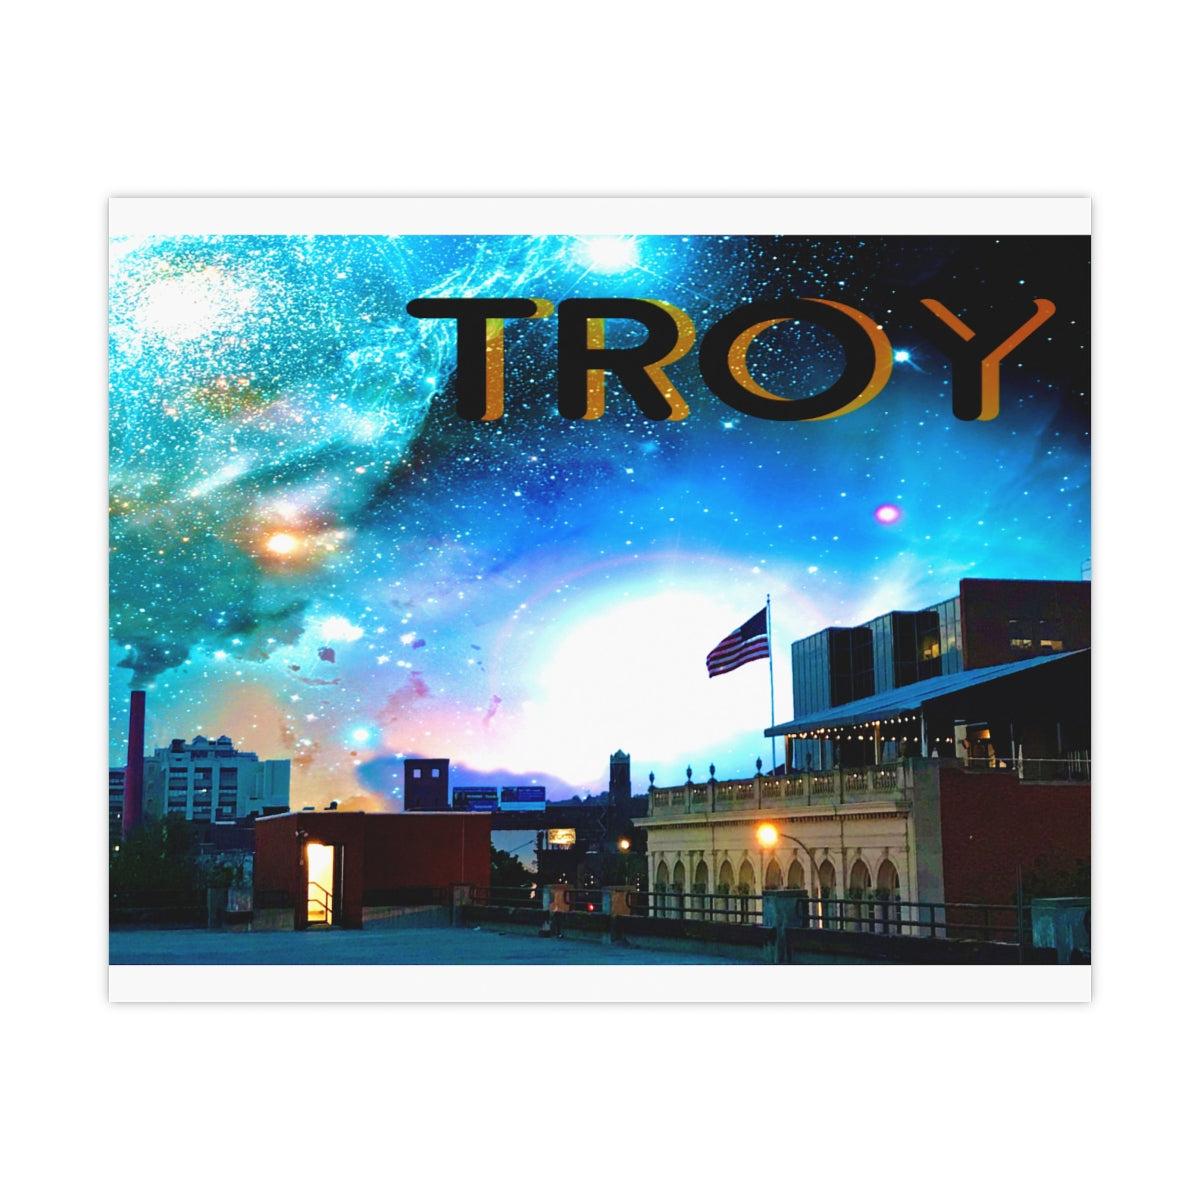 Troy Top of the Parking garage poster